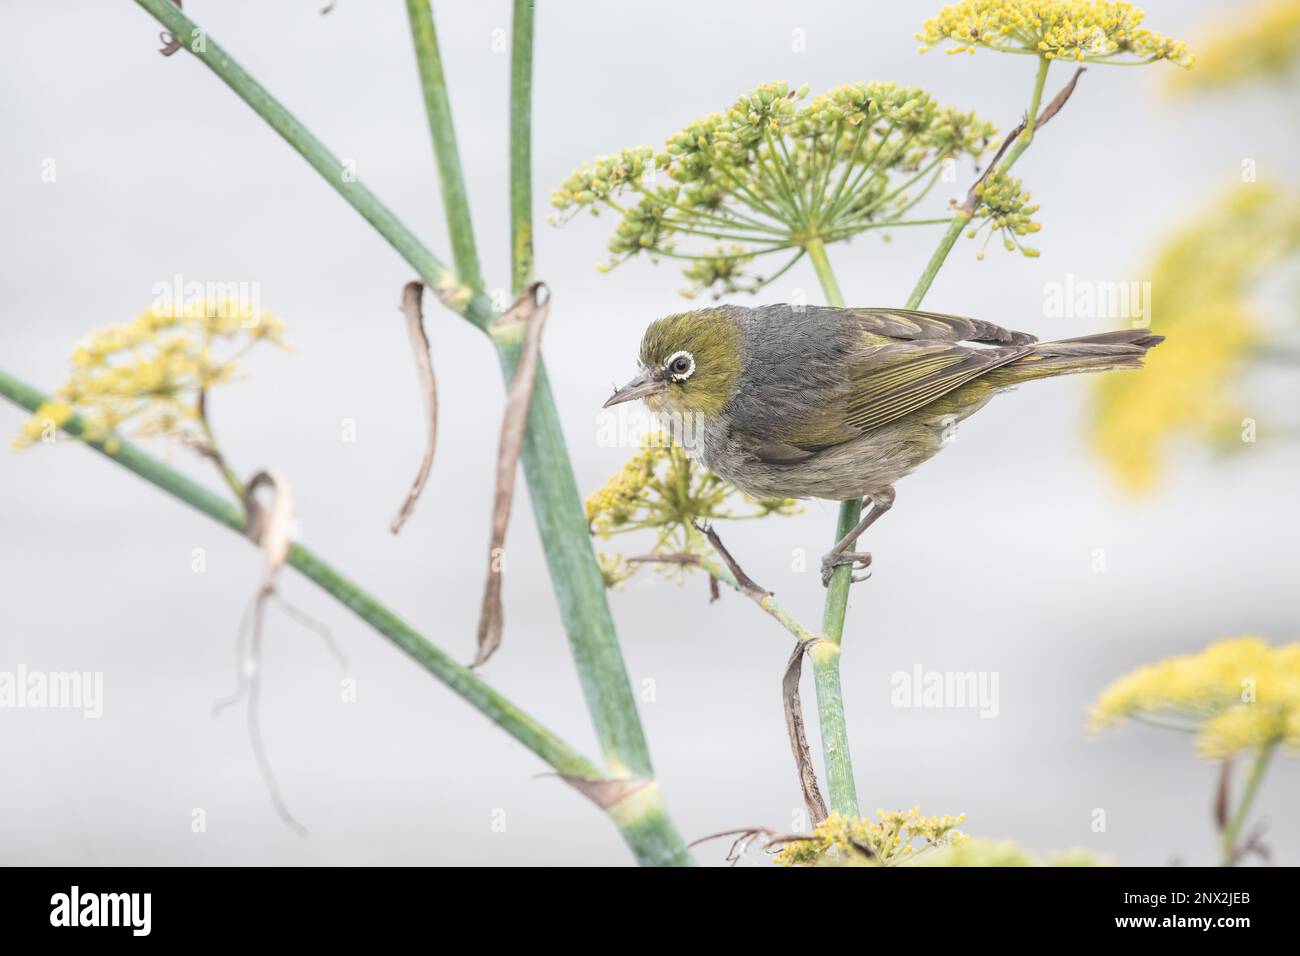 Silvereye (Zosterops lateralis) perched on yellow flowers in Aotearoa New Zealand on the South Island near Oamaru. Stock Photo